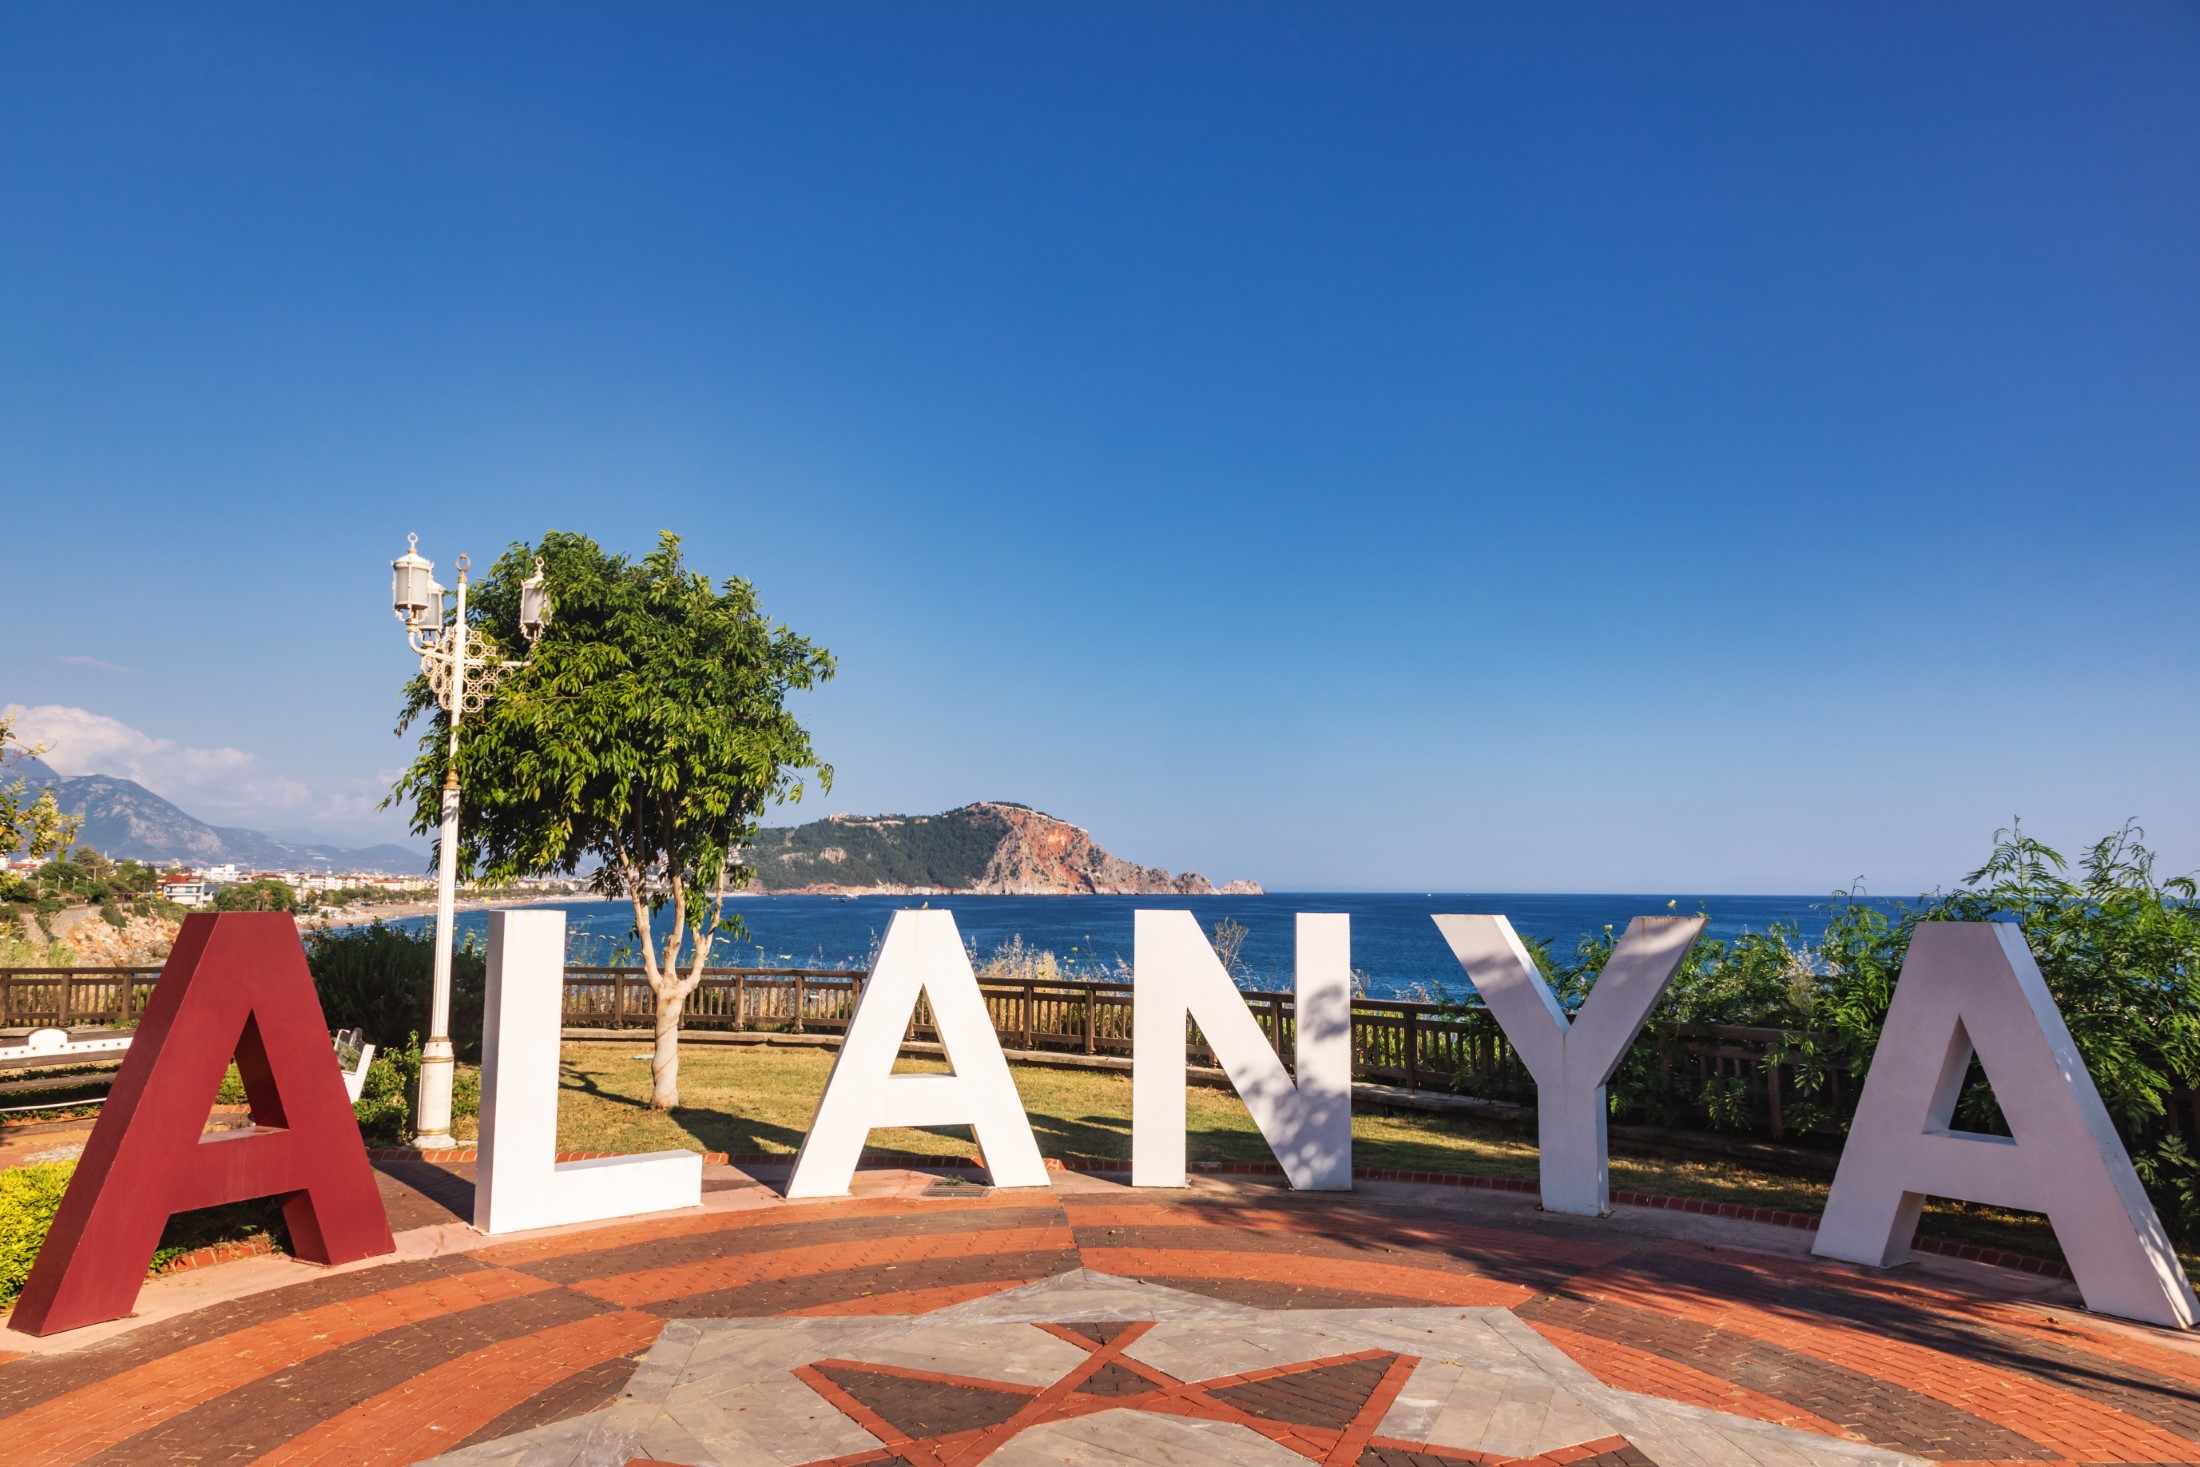 ALANYA sign with a scenic view of the sea and   Alanya Castle in the background